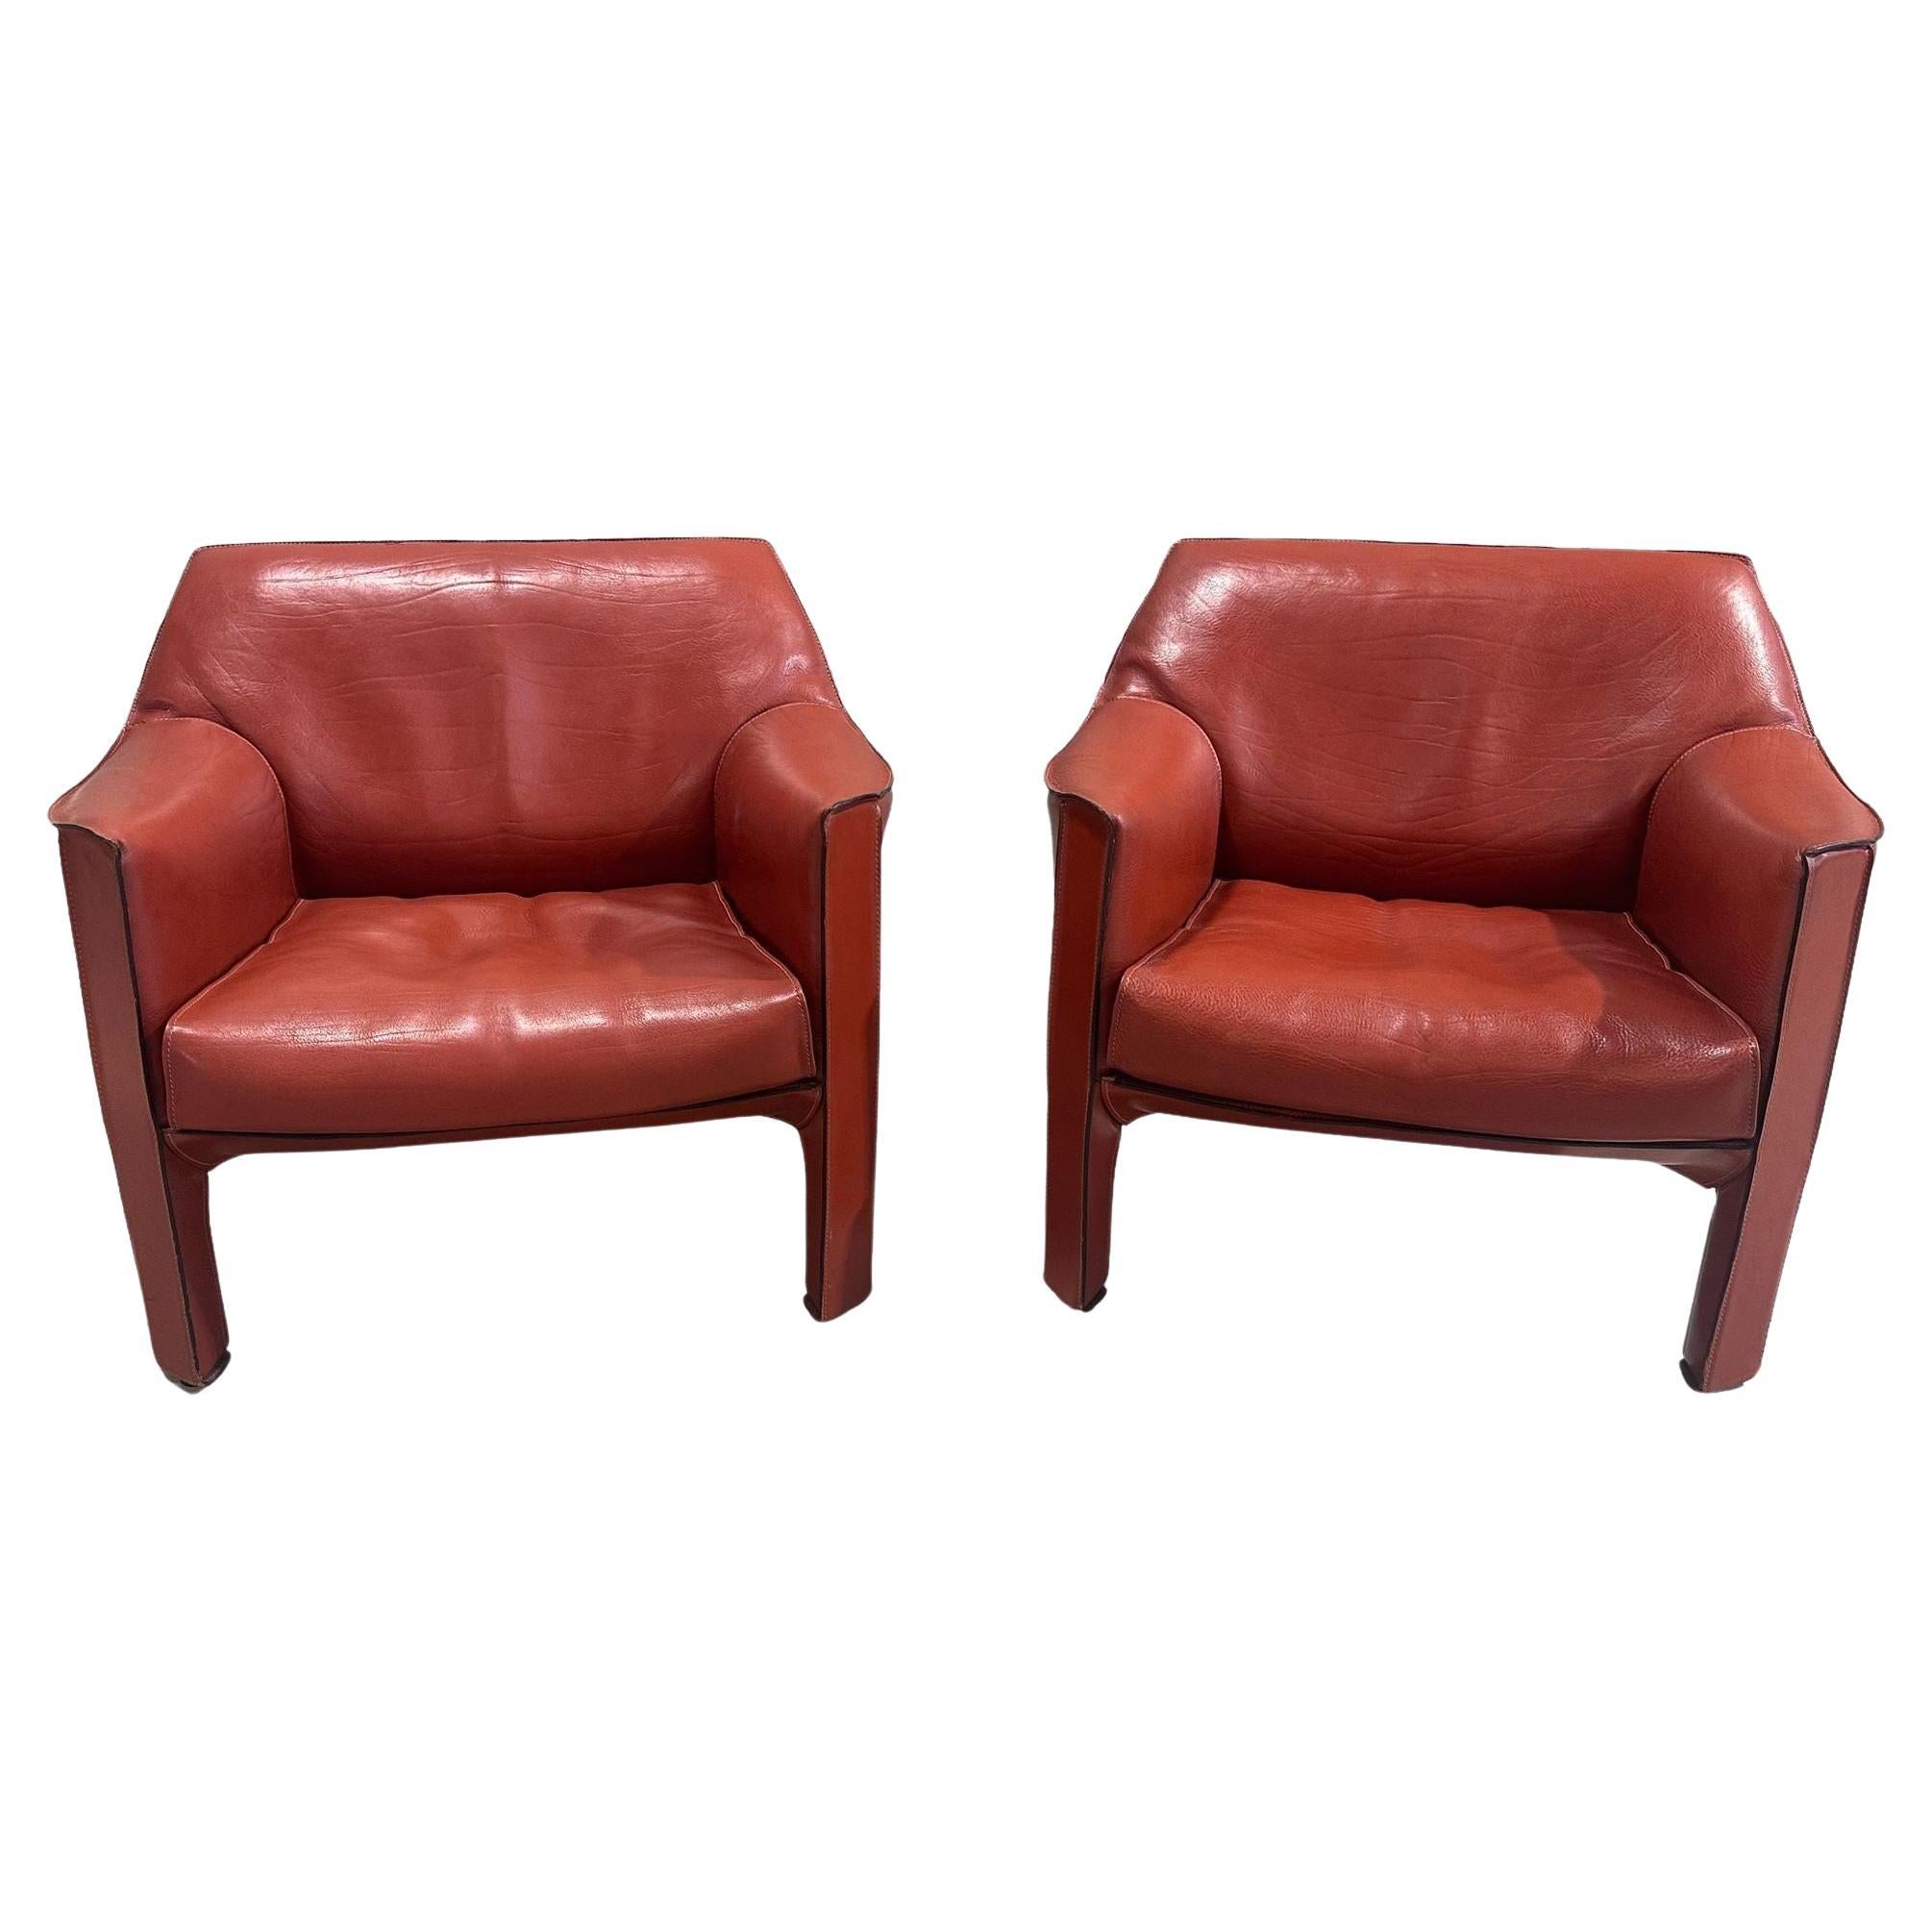 Mario Bellini Pair Leather Cab Lounge Chairs, Model 415, Italy 1970